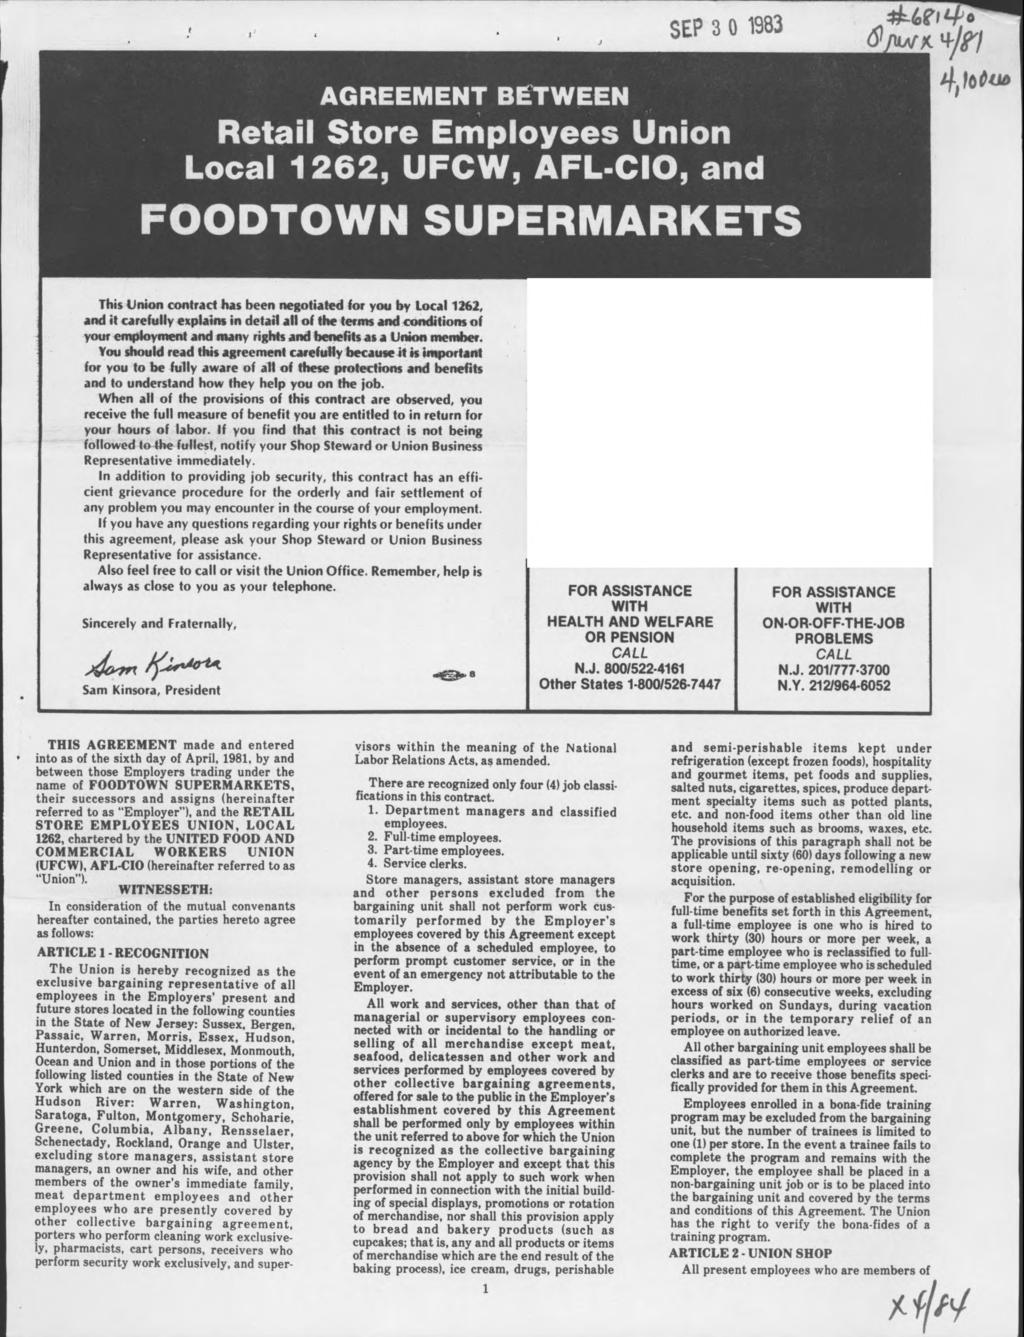 SEP 3 0 1983 AGREEMENT BETWEEN 1 Retail Store Employees Union Local 1262, UFCW, AFL-CIO, and FOODTOWN SUPERMARKETS This Union contract has been negotiated (or you by Local 1262, and it carefully